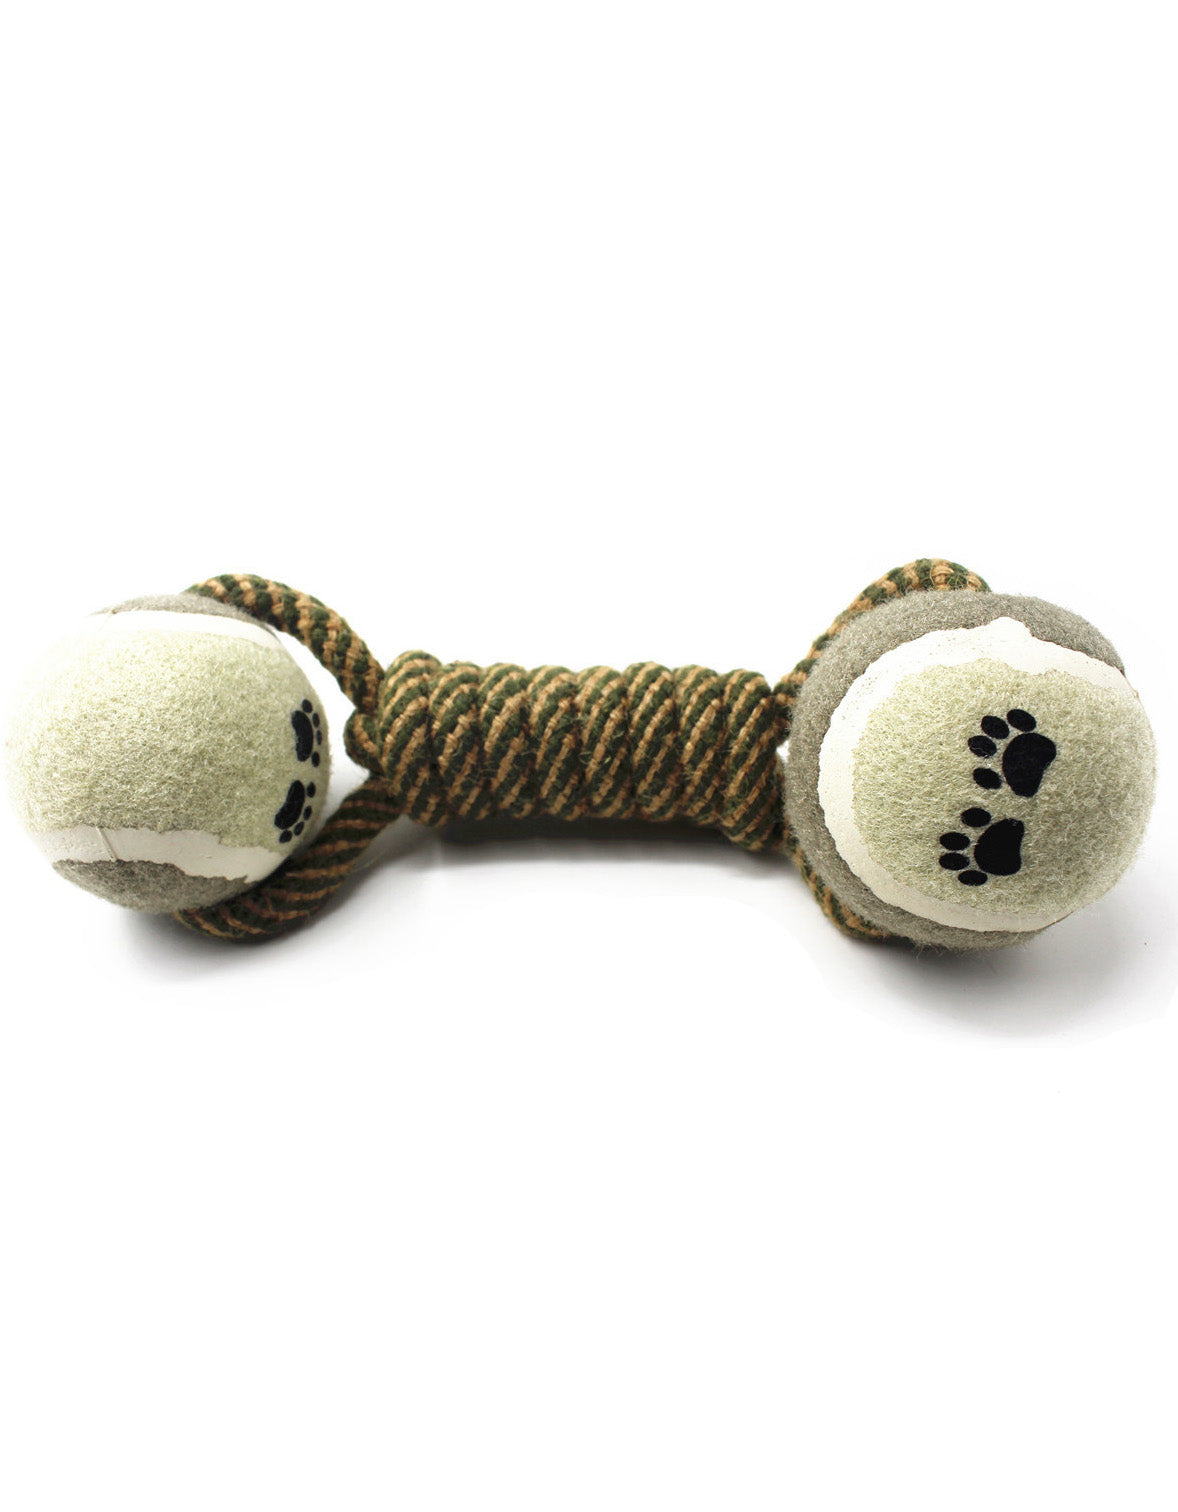 Knotted Rope Dental Chews Dog Toy